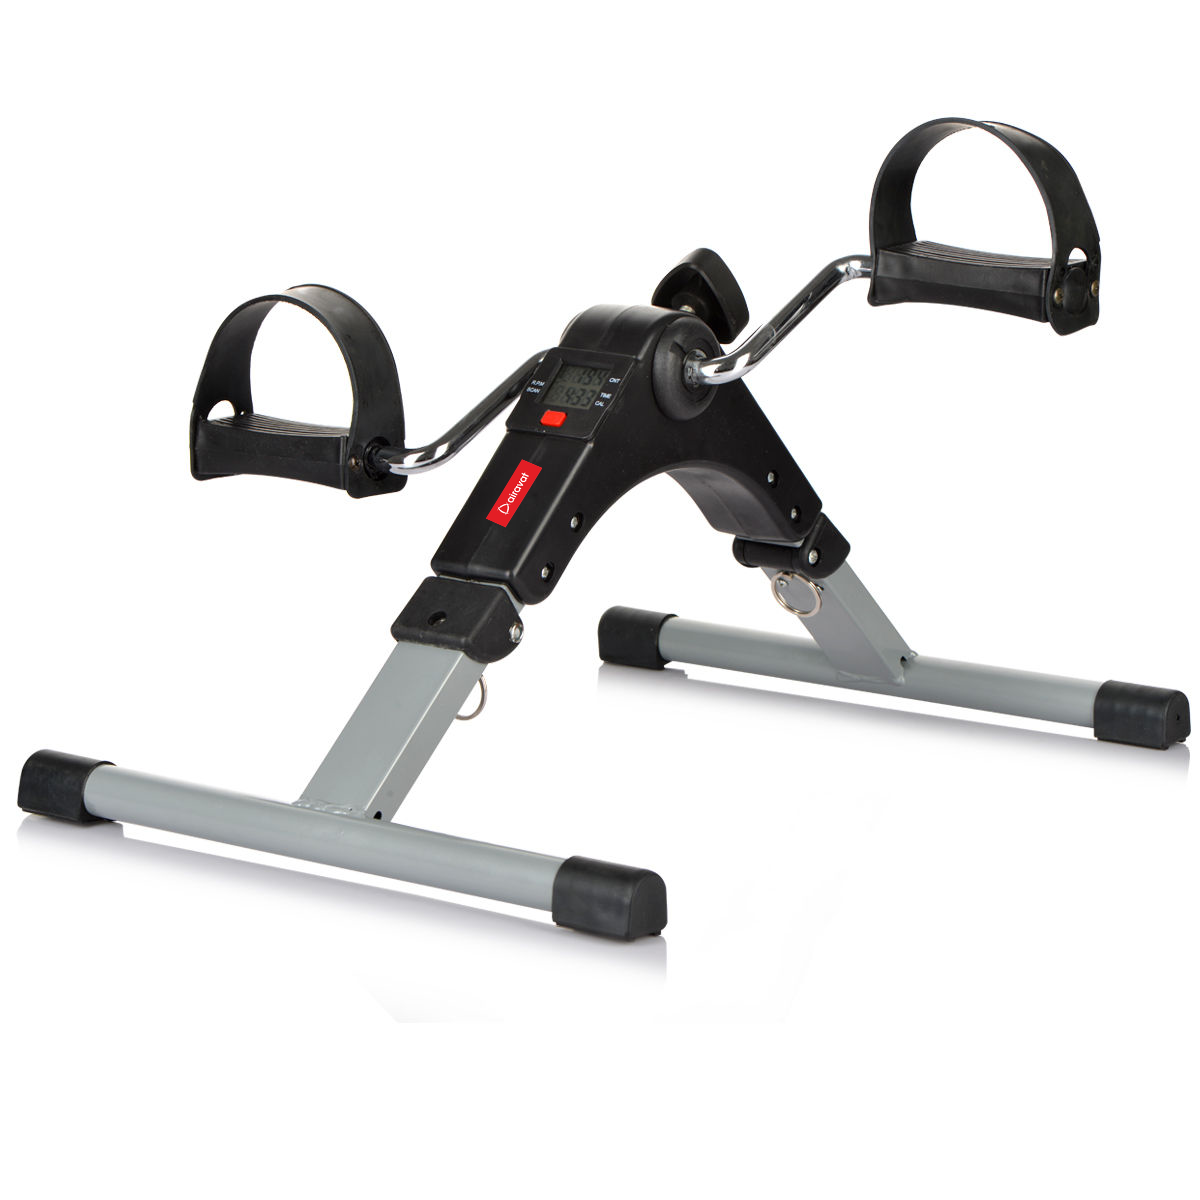 EXERCISE CYCLE FOLDABLE 4521